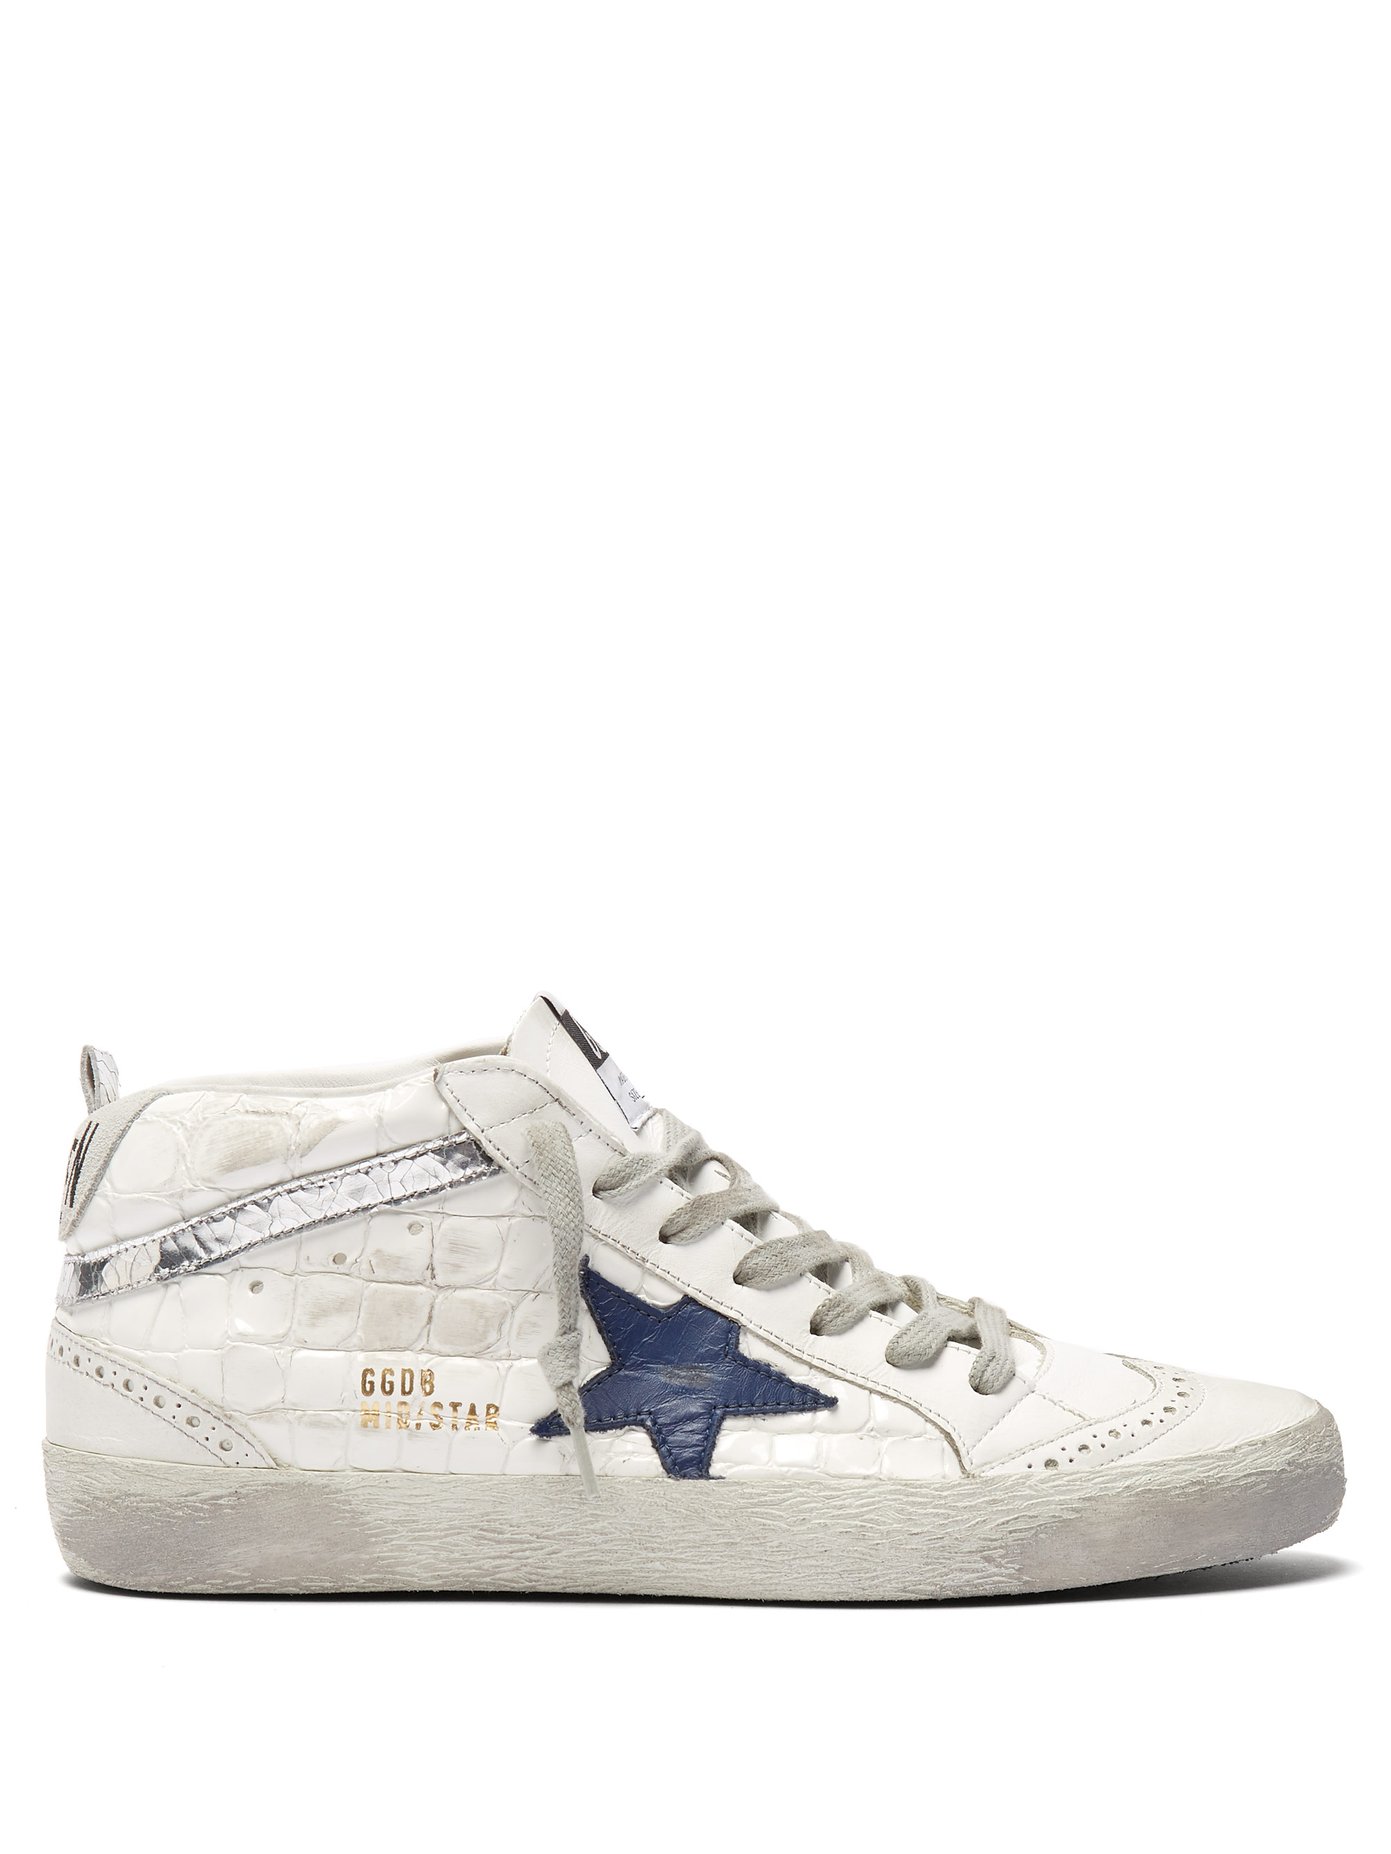 Mid-Star croc-embossed leather and 